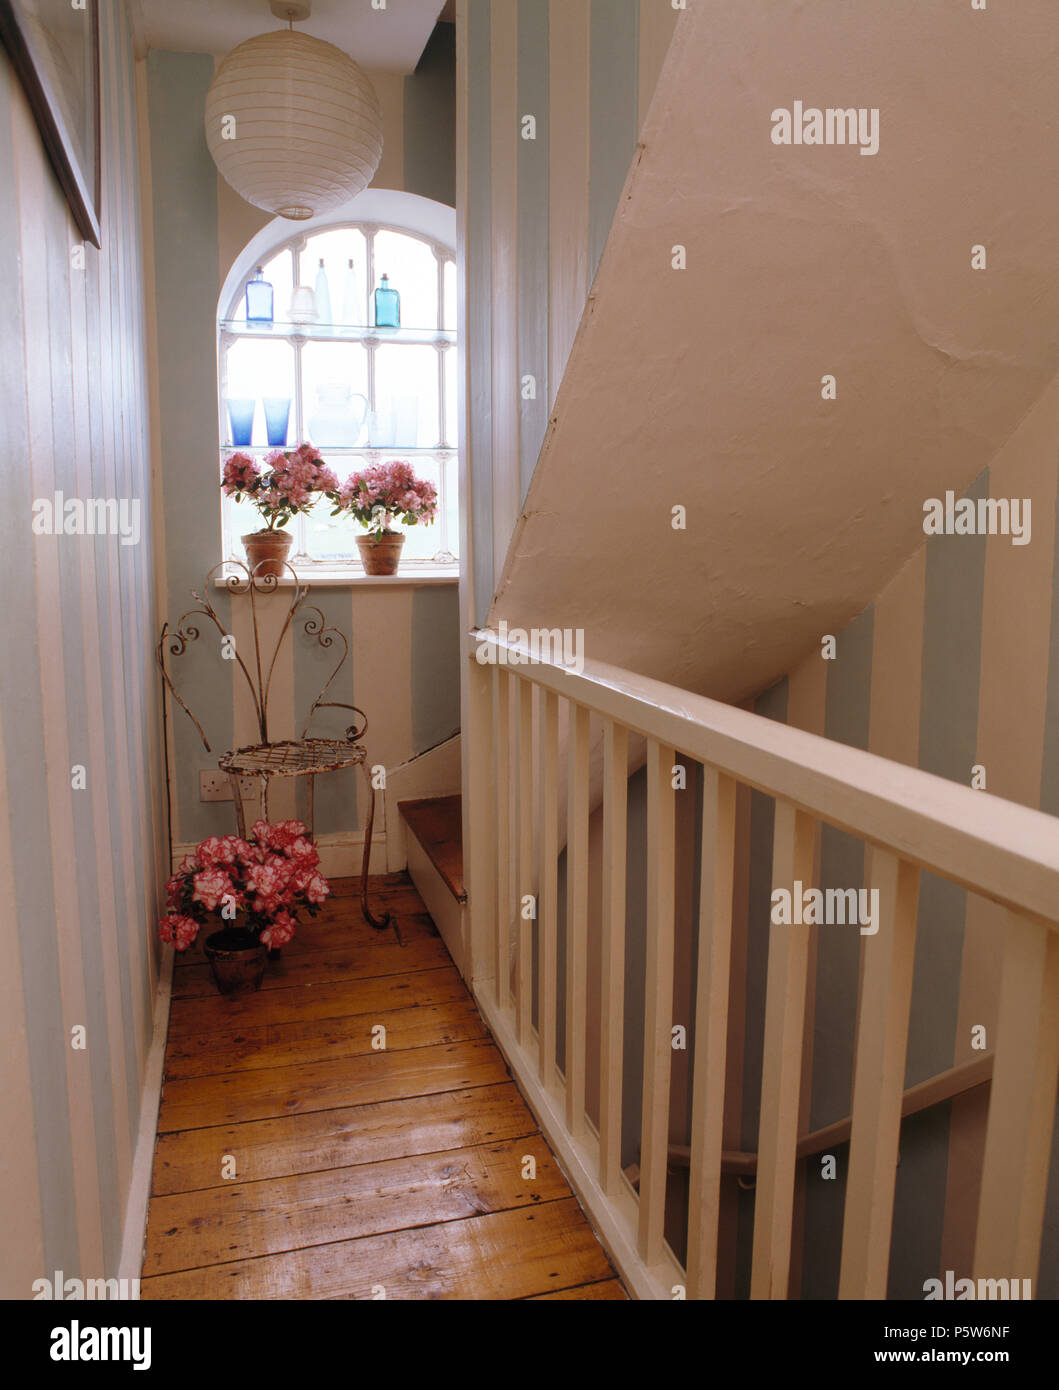 Hand painted blue+white stripes on walls of stairs and narrow landing with stripped wooden floorboards Stock Photo